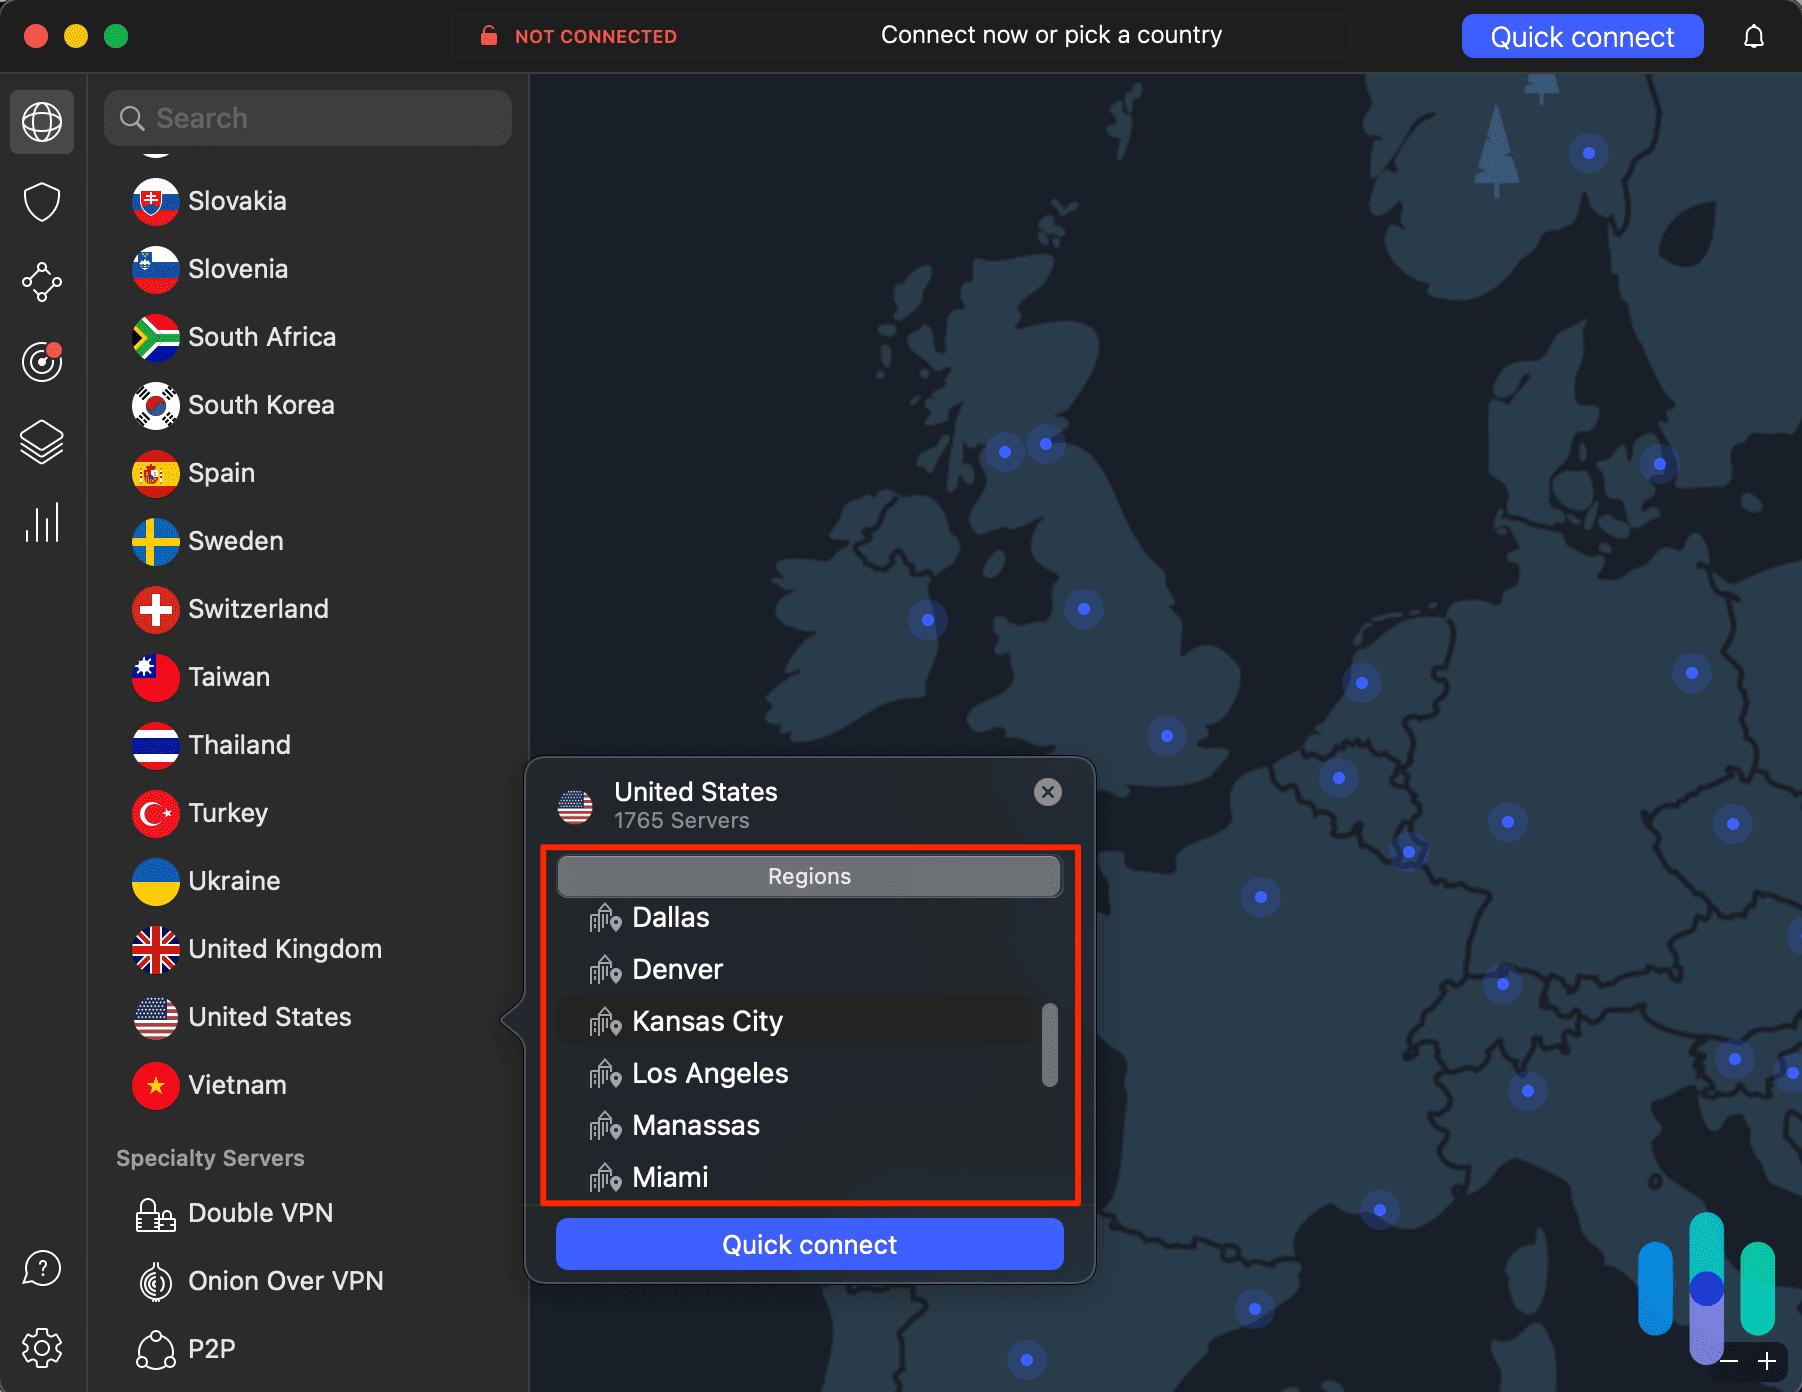 NordVPN has 16 US different cities to connect to with over 1765 servers